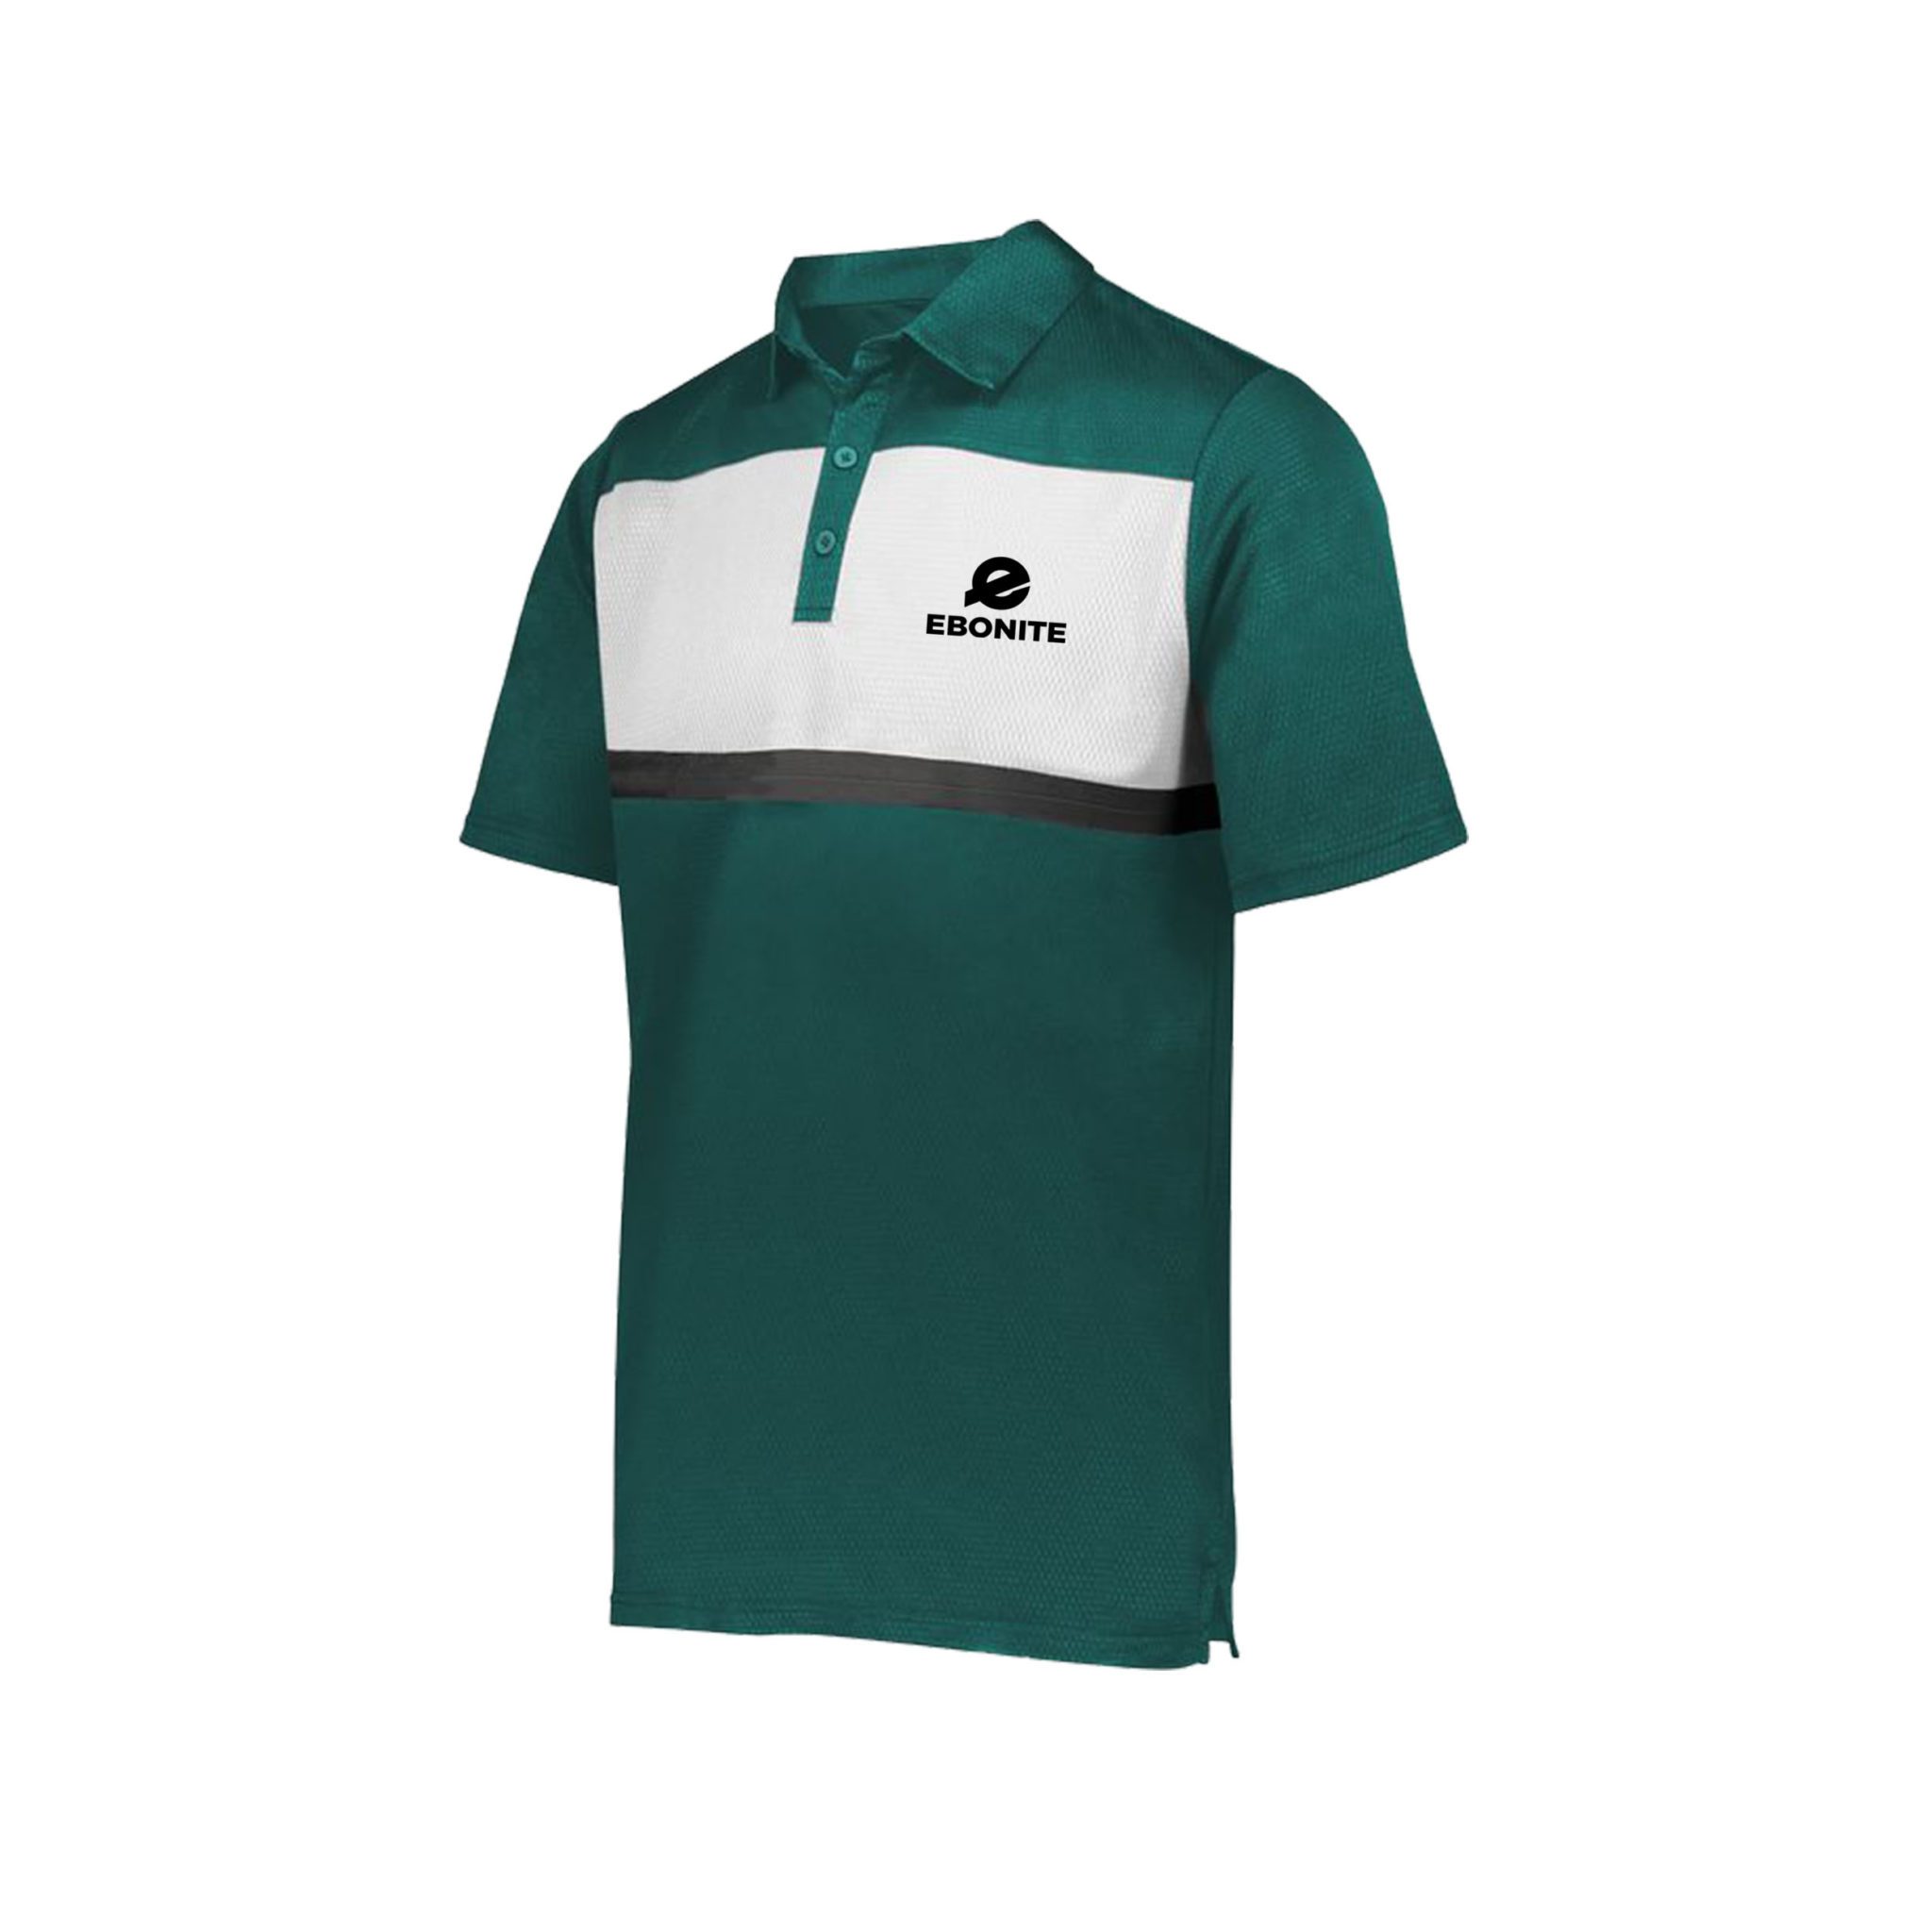 Custom Ebonite Polo Shirts on Sale with Free Shipping at Coolwick.com